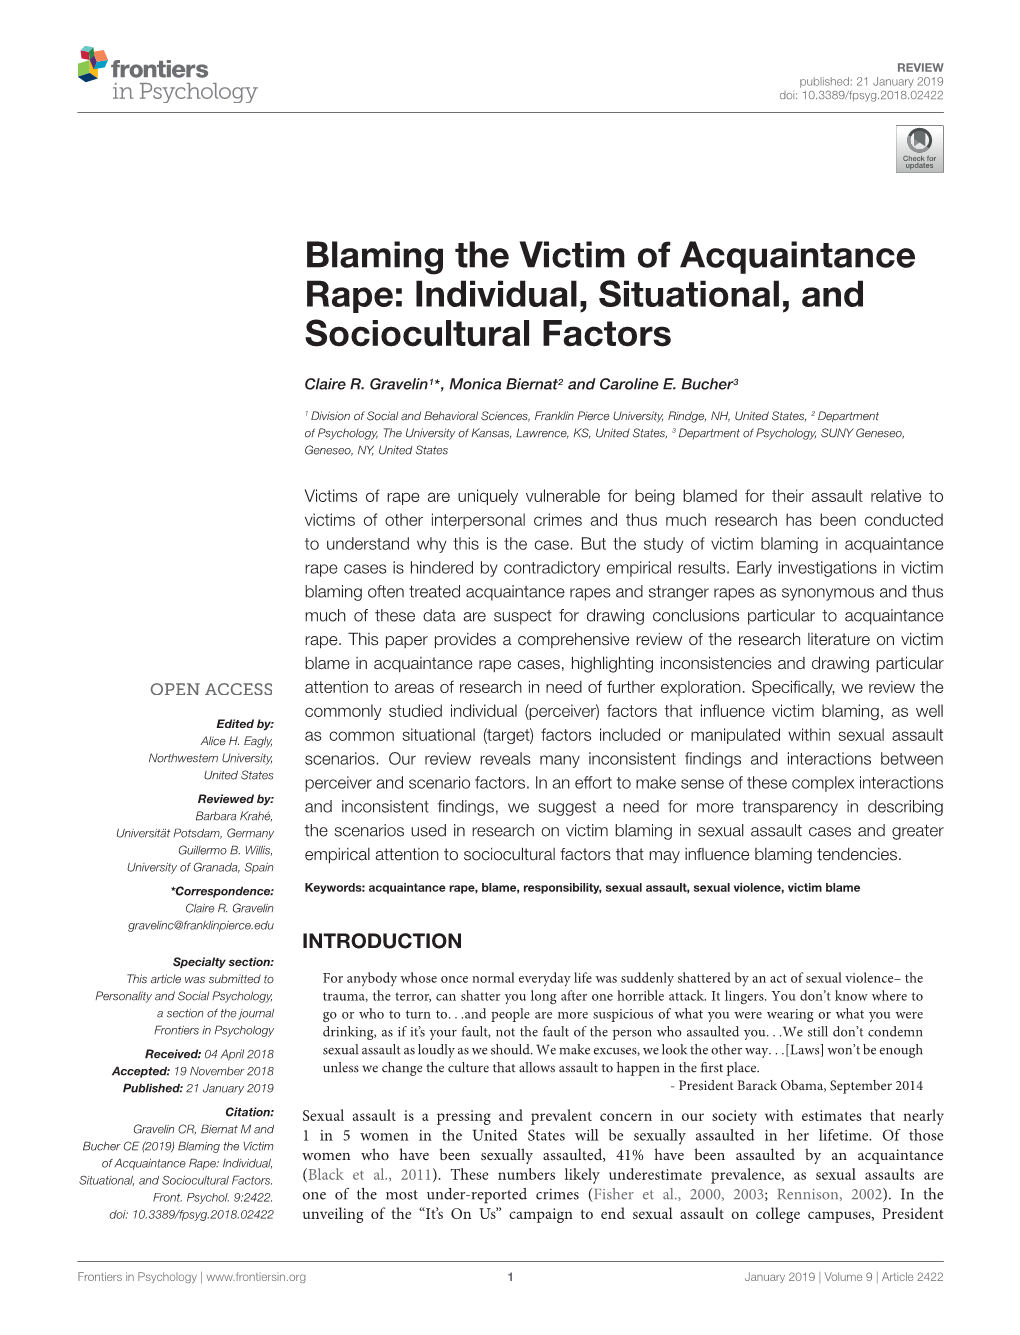 Blaming the Victim of Acquaintance Rape: Individual, Situational, and Sociocultural Factors